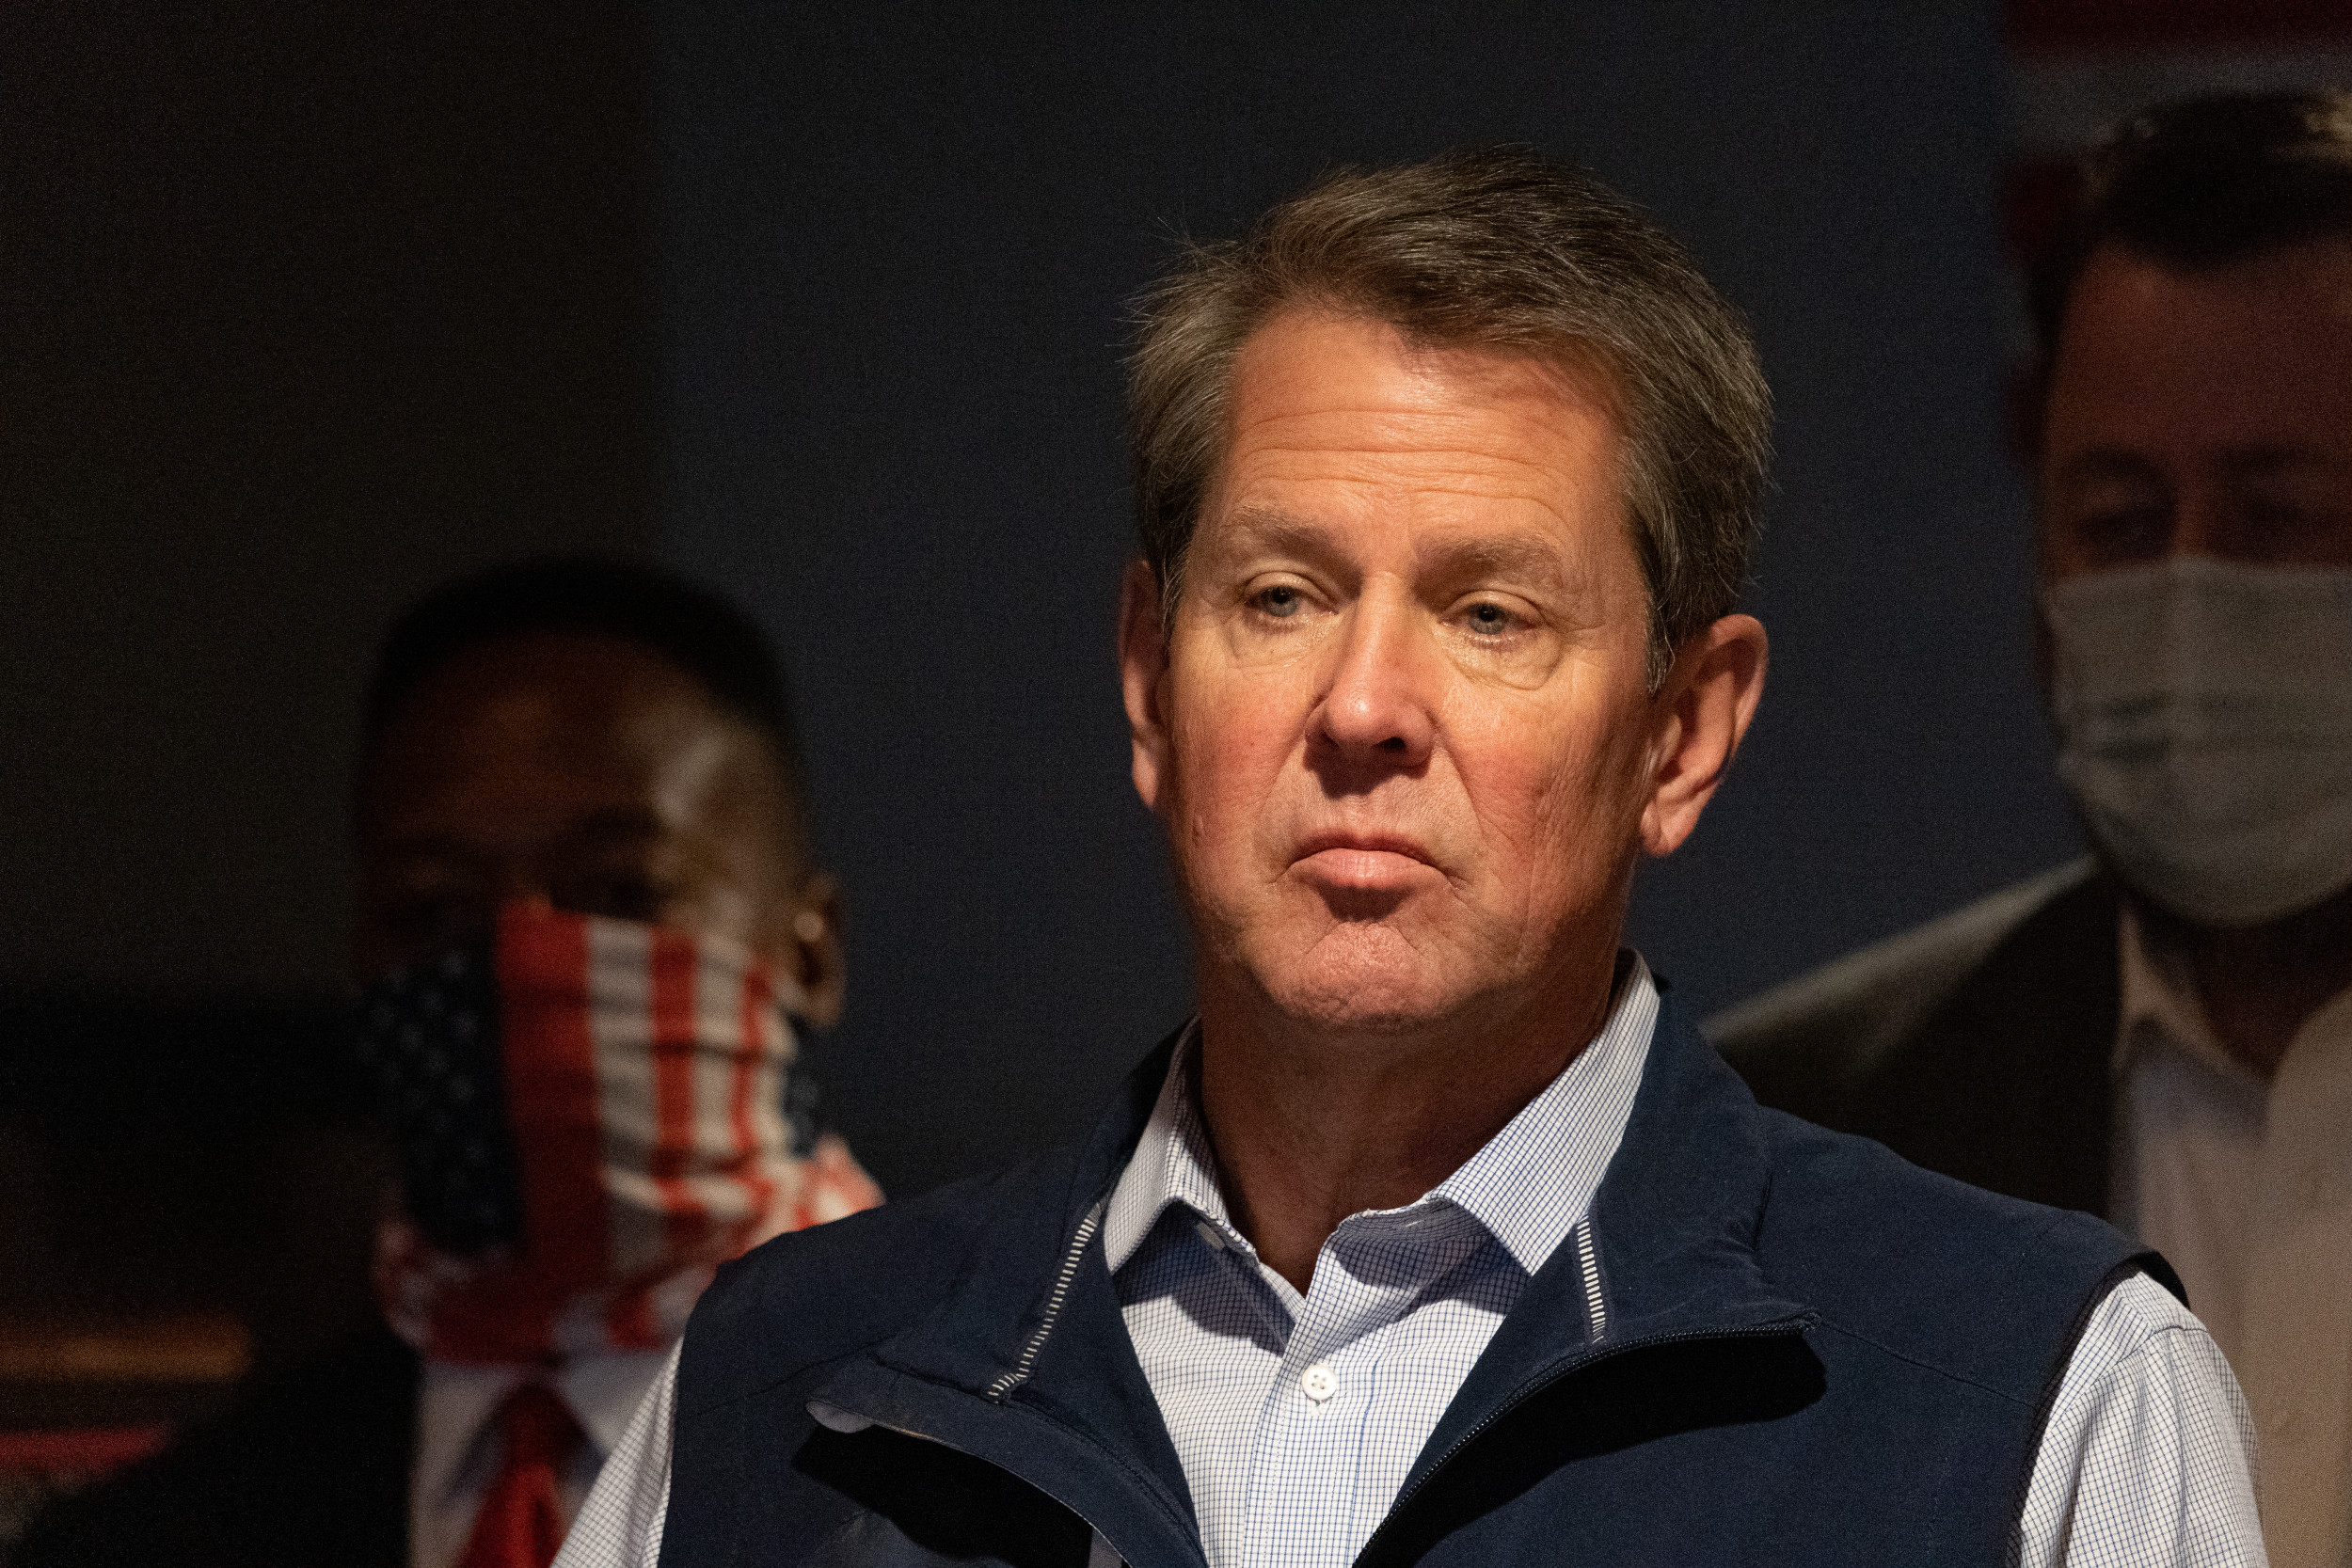 brian-kemp-wants-to-give-georgians-at-least-250-tax-rebate-with-state-s-surplus-cash